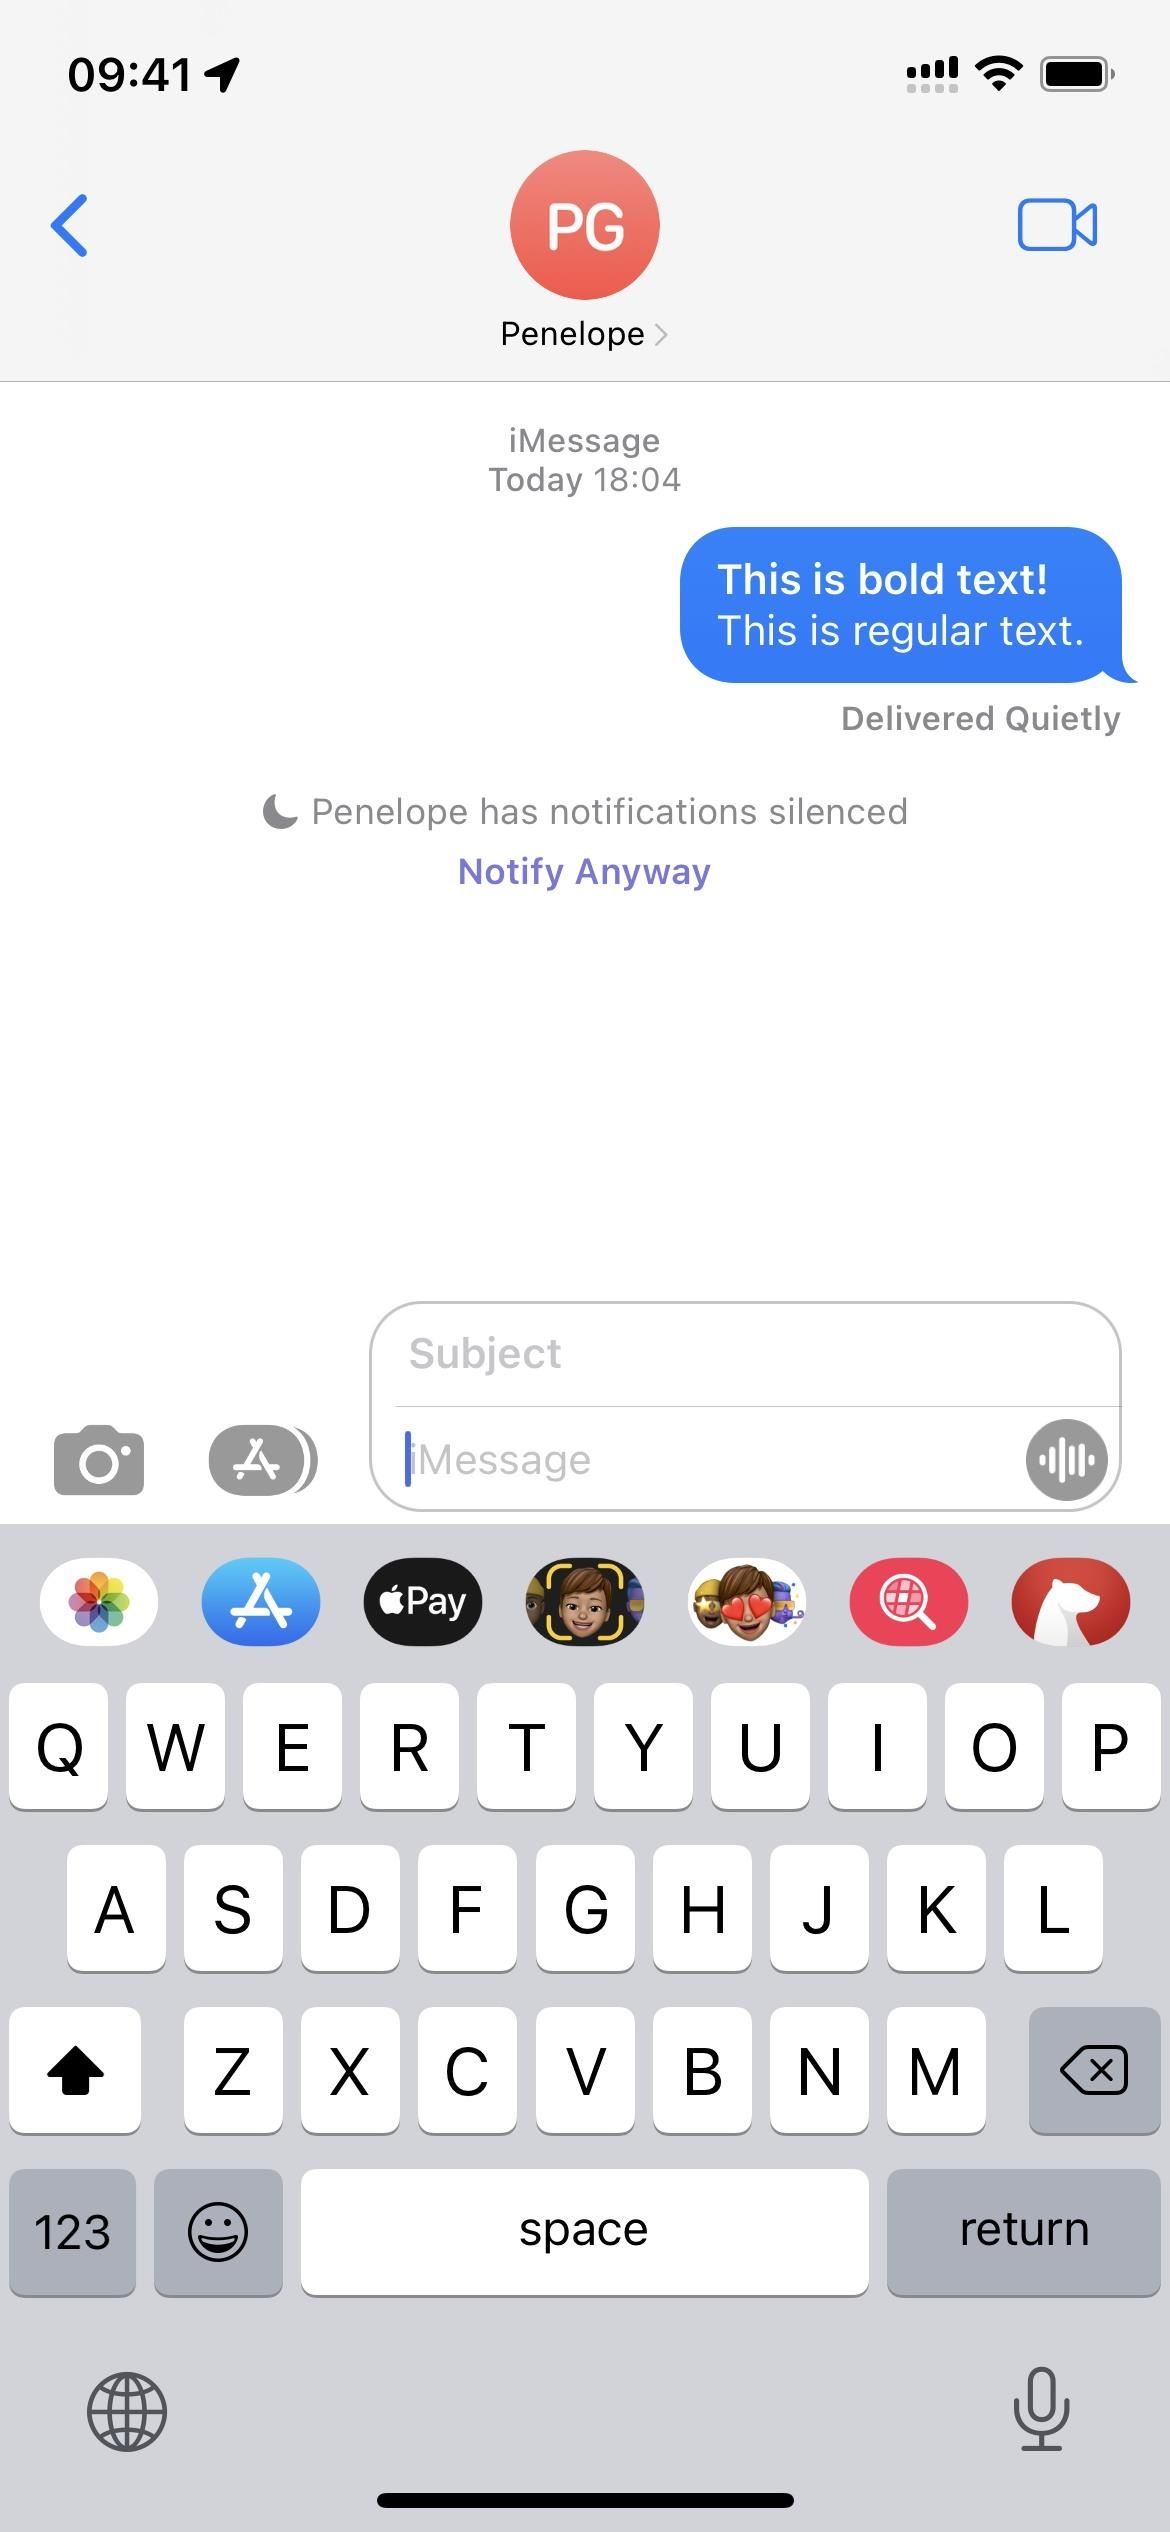 12 Hidden iMessage Features for iPhone You Probably Didn't Know About